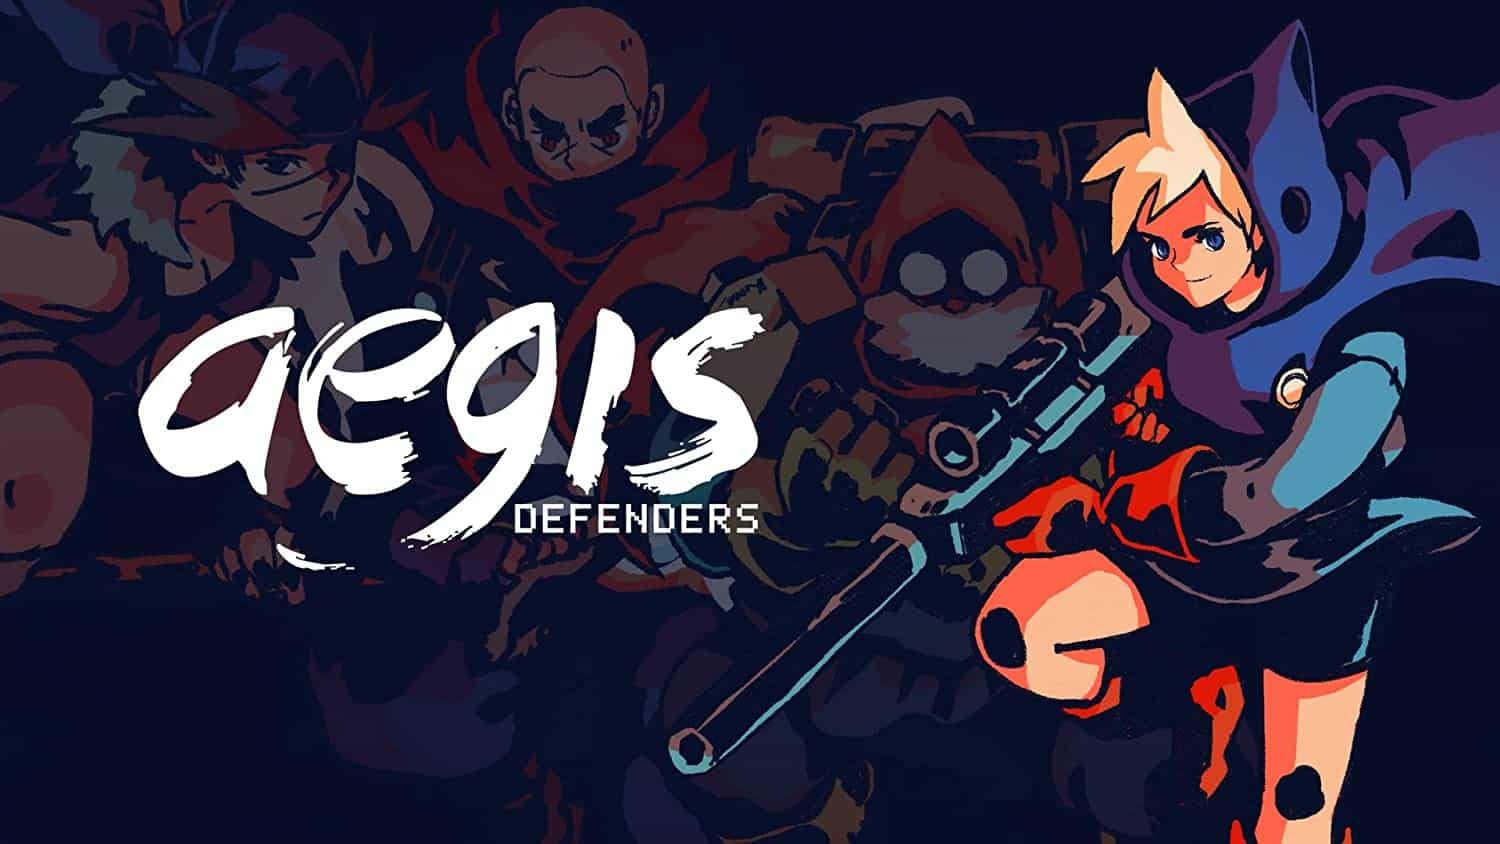 Aegis Defenders player count stats